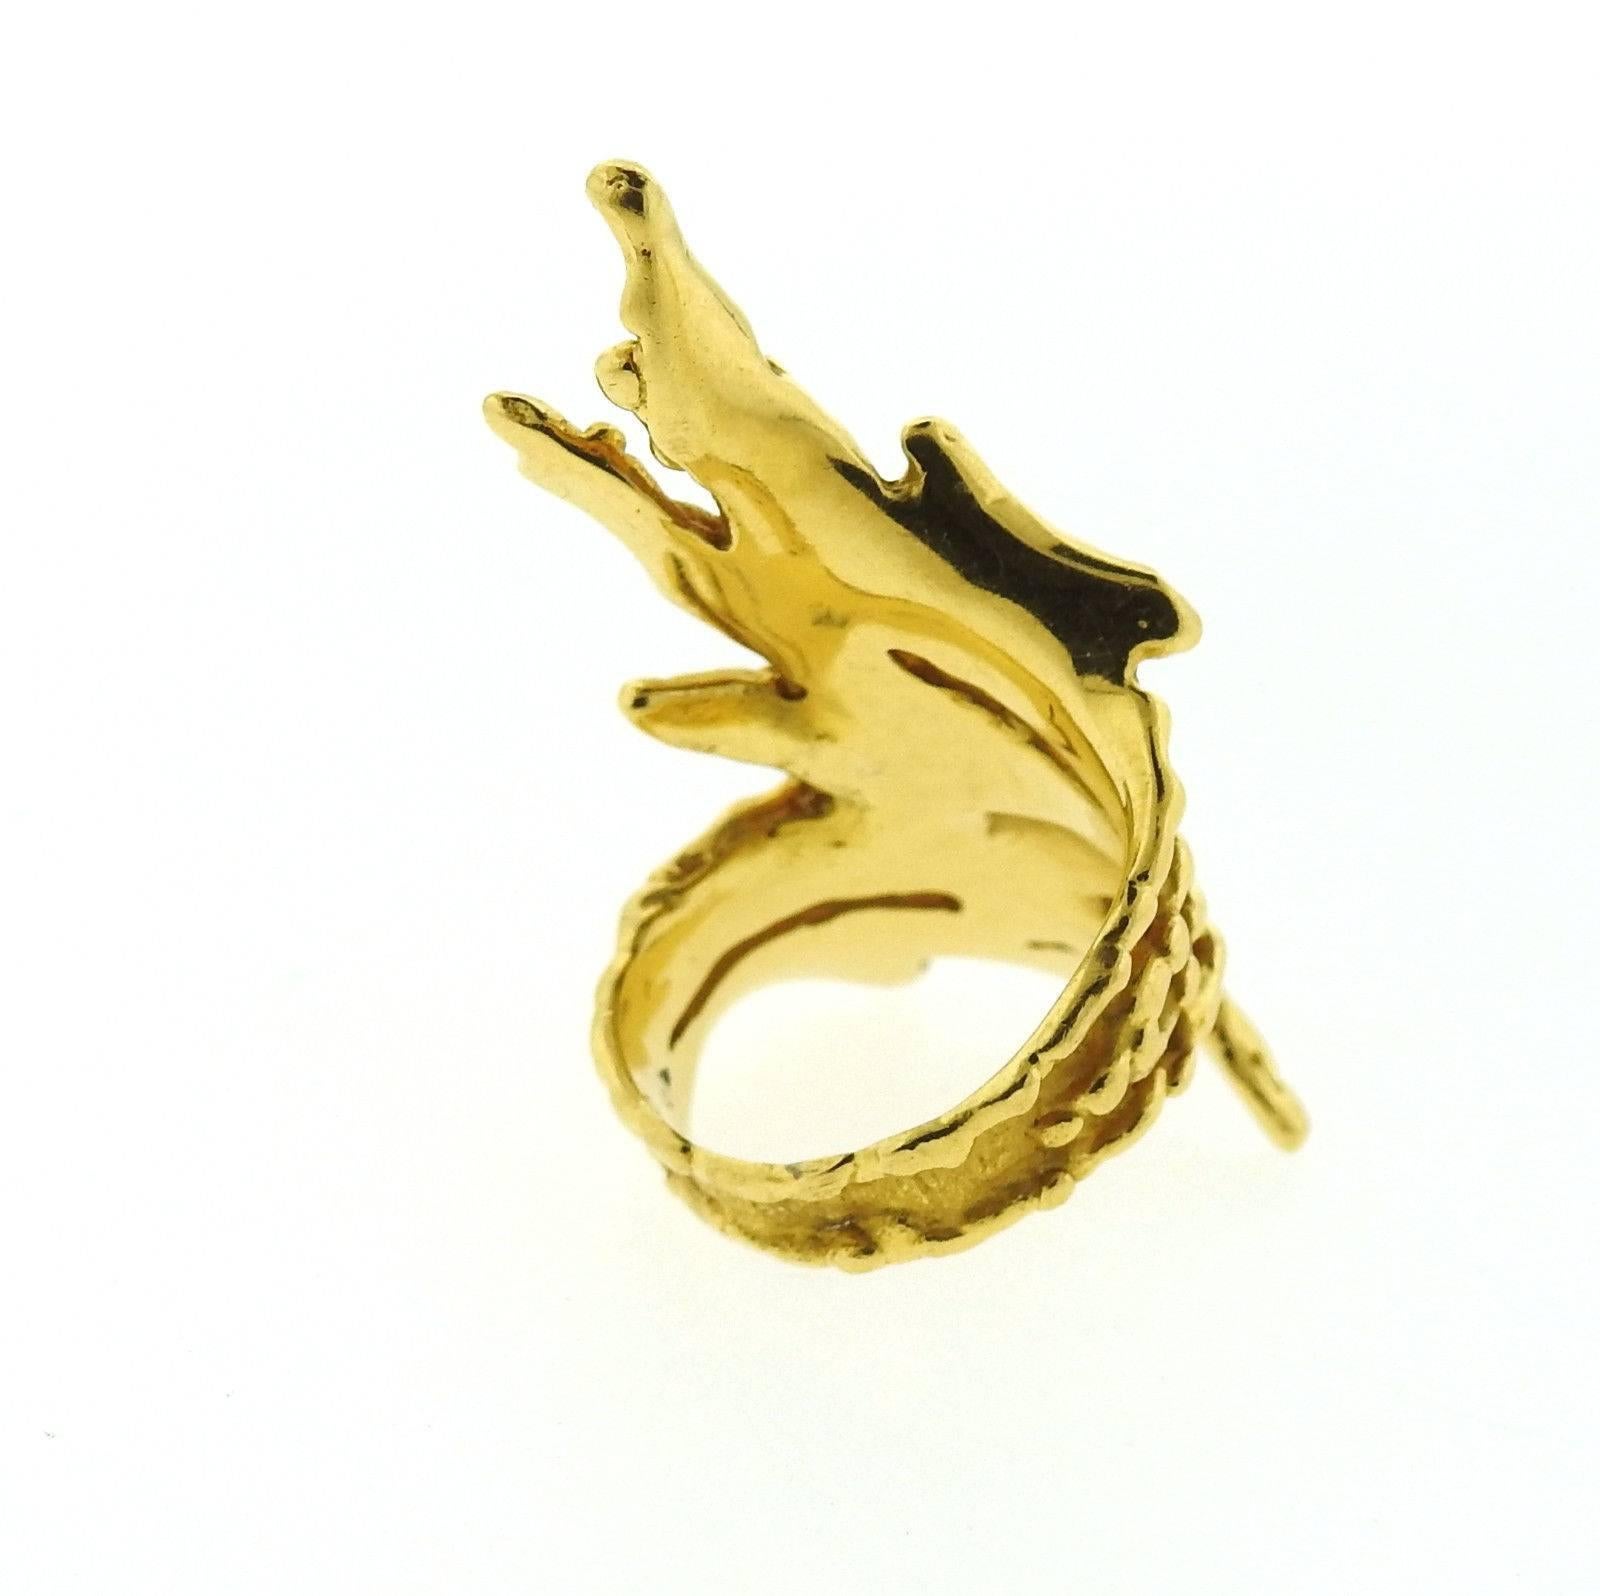 An 18k yellow gold ring set with approximately 0.09ctw of HI/SI diamonds.  The ring is a size 6, ring top is 45mm wide.  The weight of the ring is 14.3 grams.